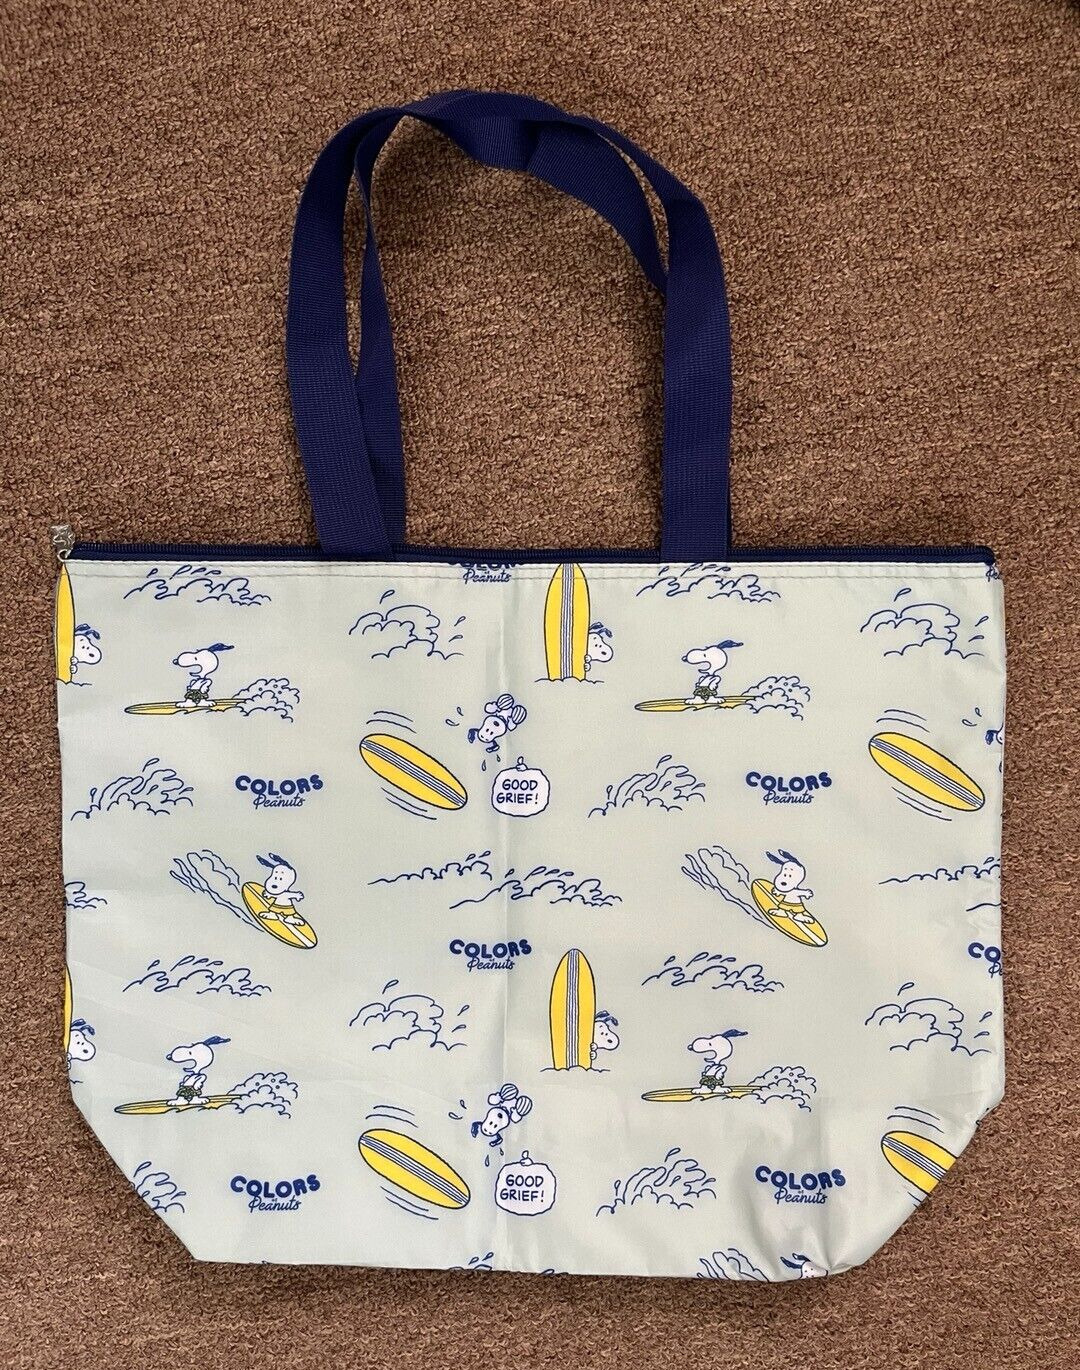 PEANUTS SNOOPY Insulated Tote Bag, Snoopy Beach Tote Bag, Snoopy Serf Pattern 